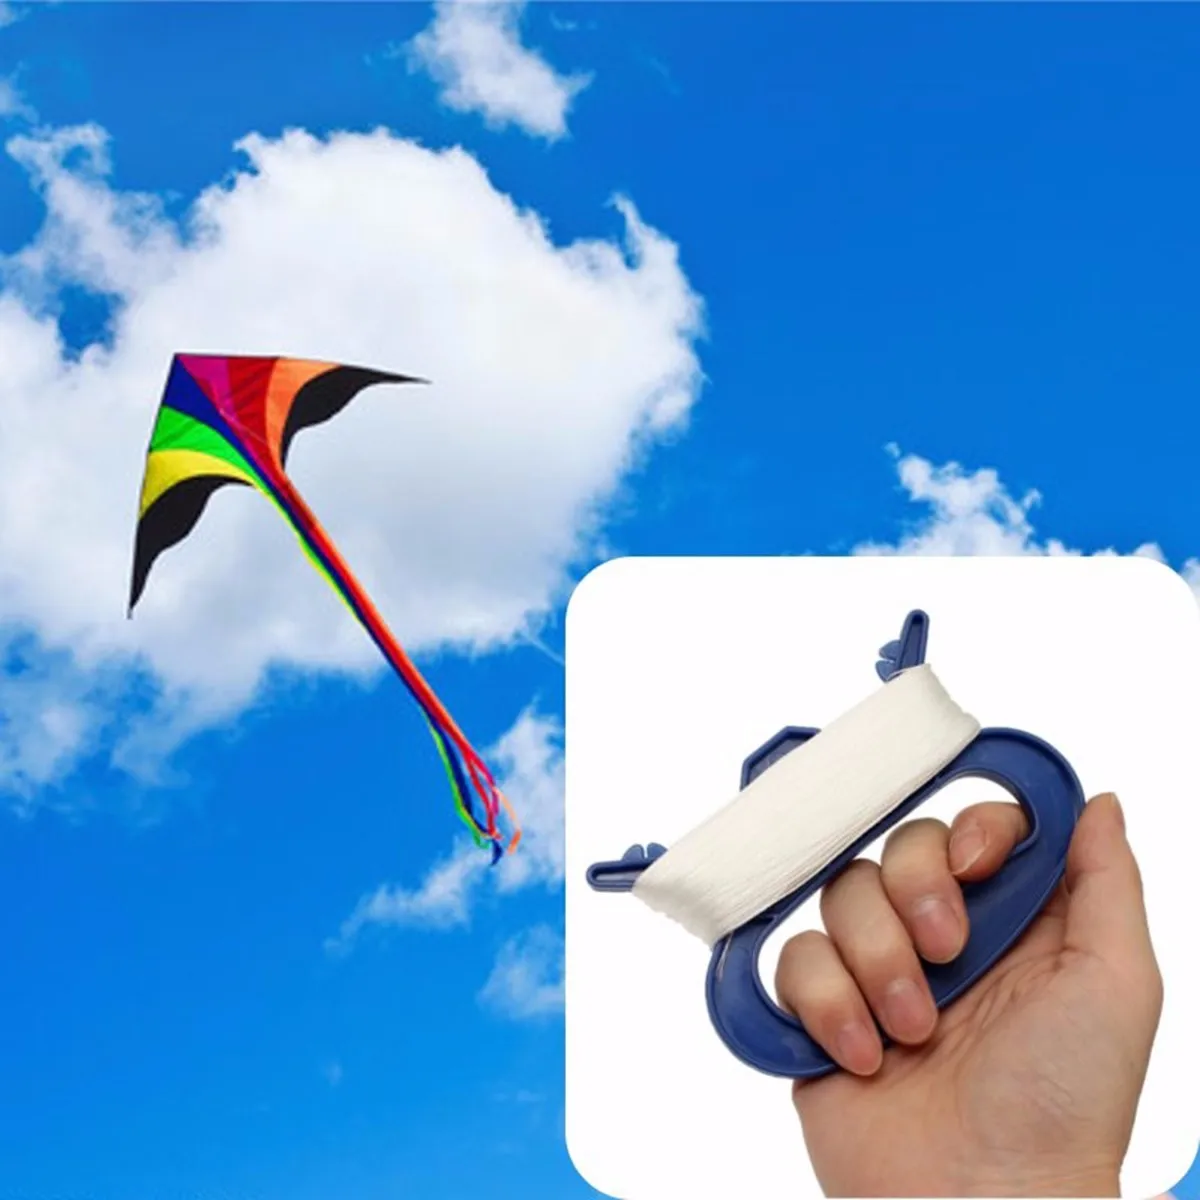 100m Flying Kite Line String With D Shape Winder Handle Board Outdoor Kite To I❤ 